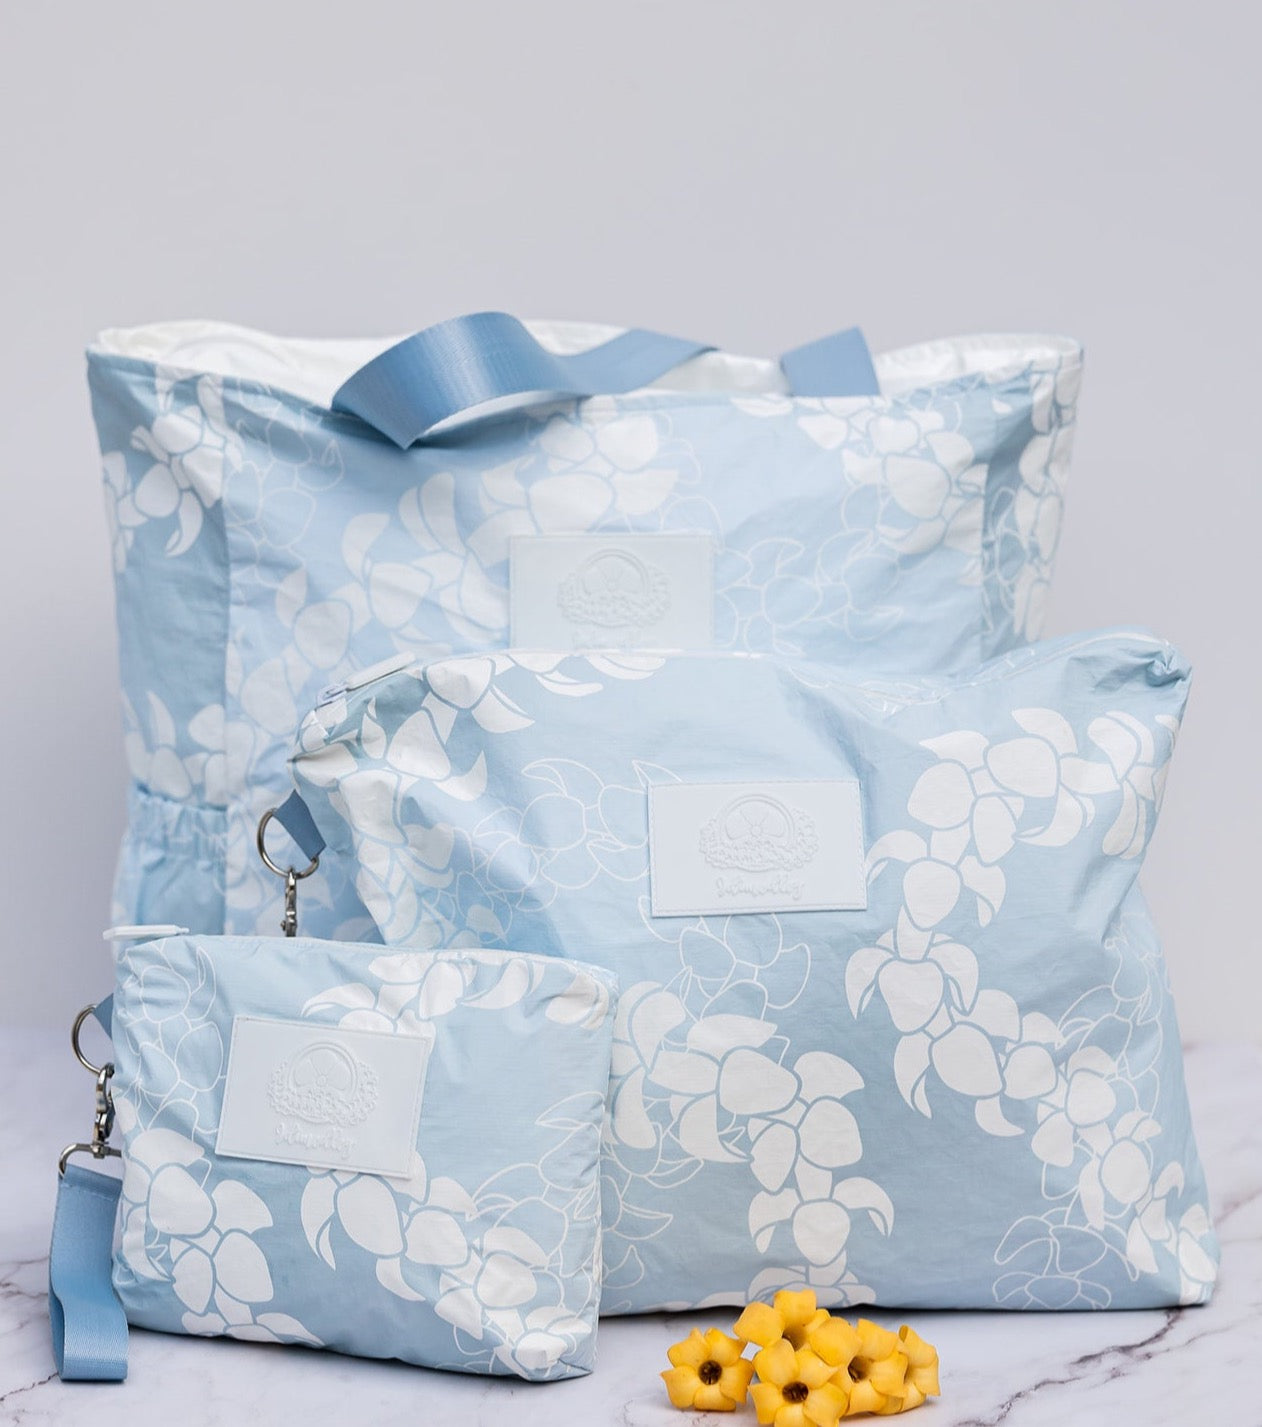 Light blue and white puakenikeni flower lei design on tyvek tote bag and matching wristlet accessory pouches of varying sizes.  